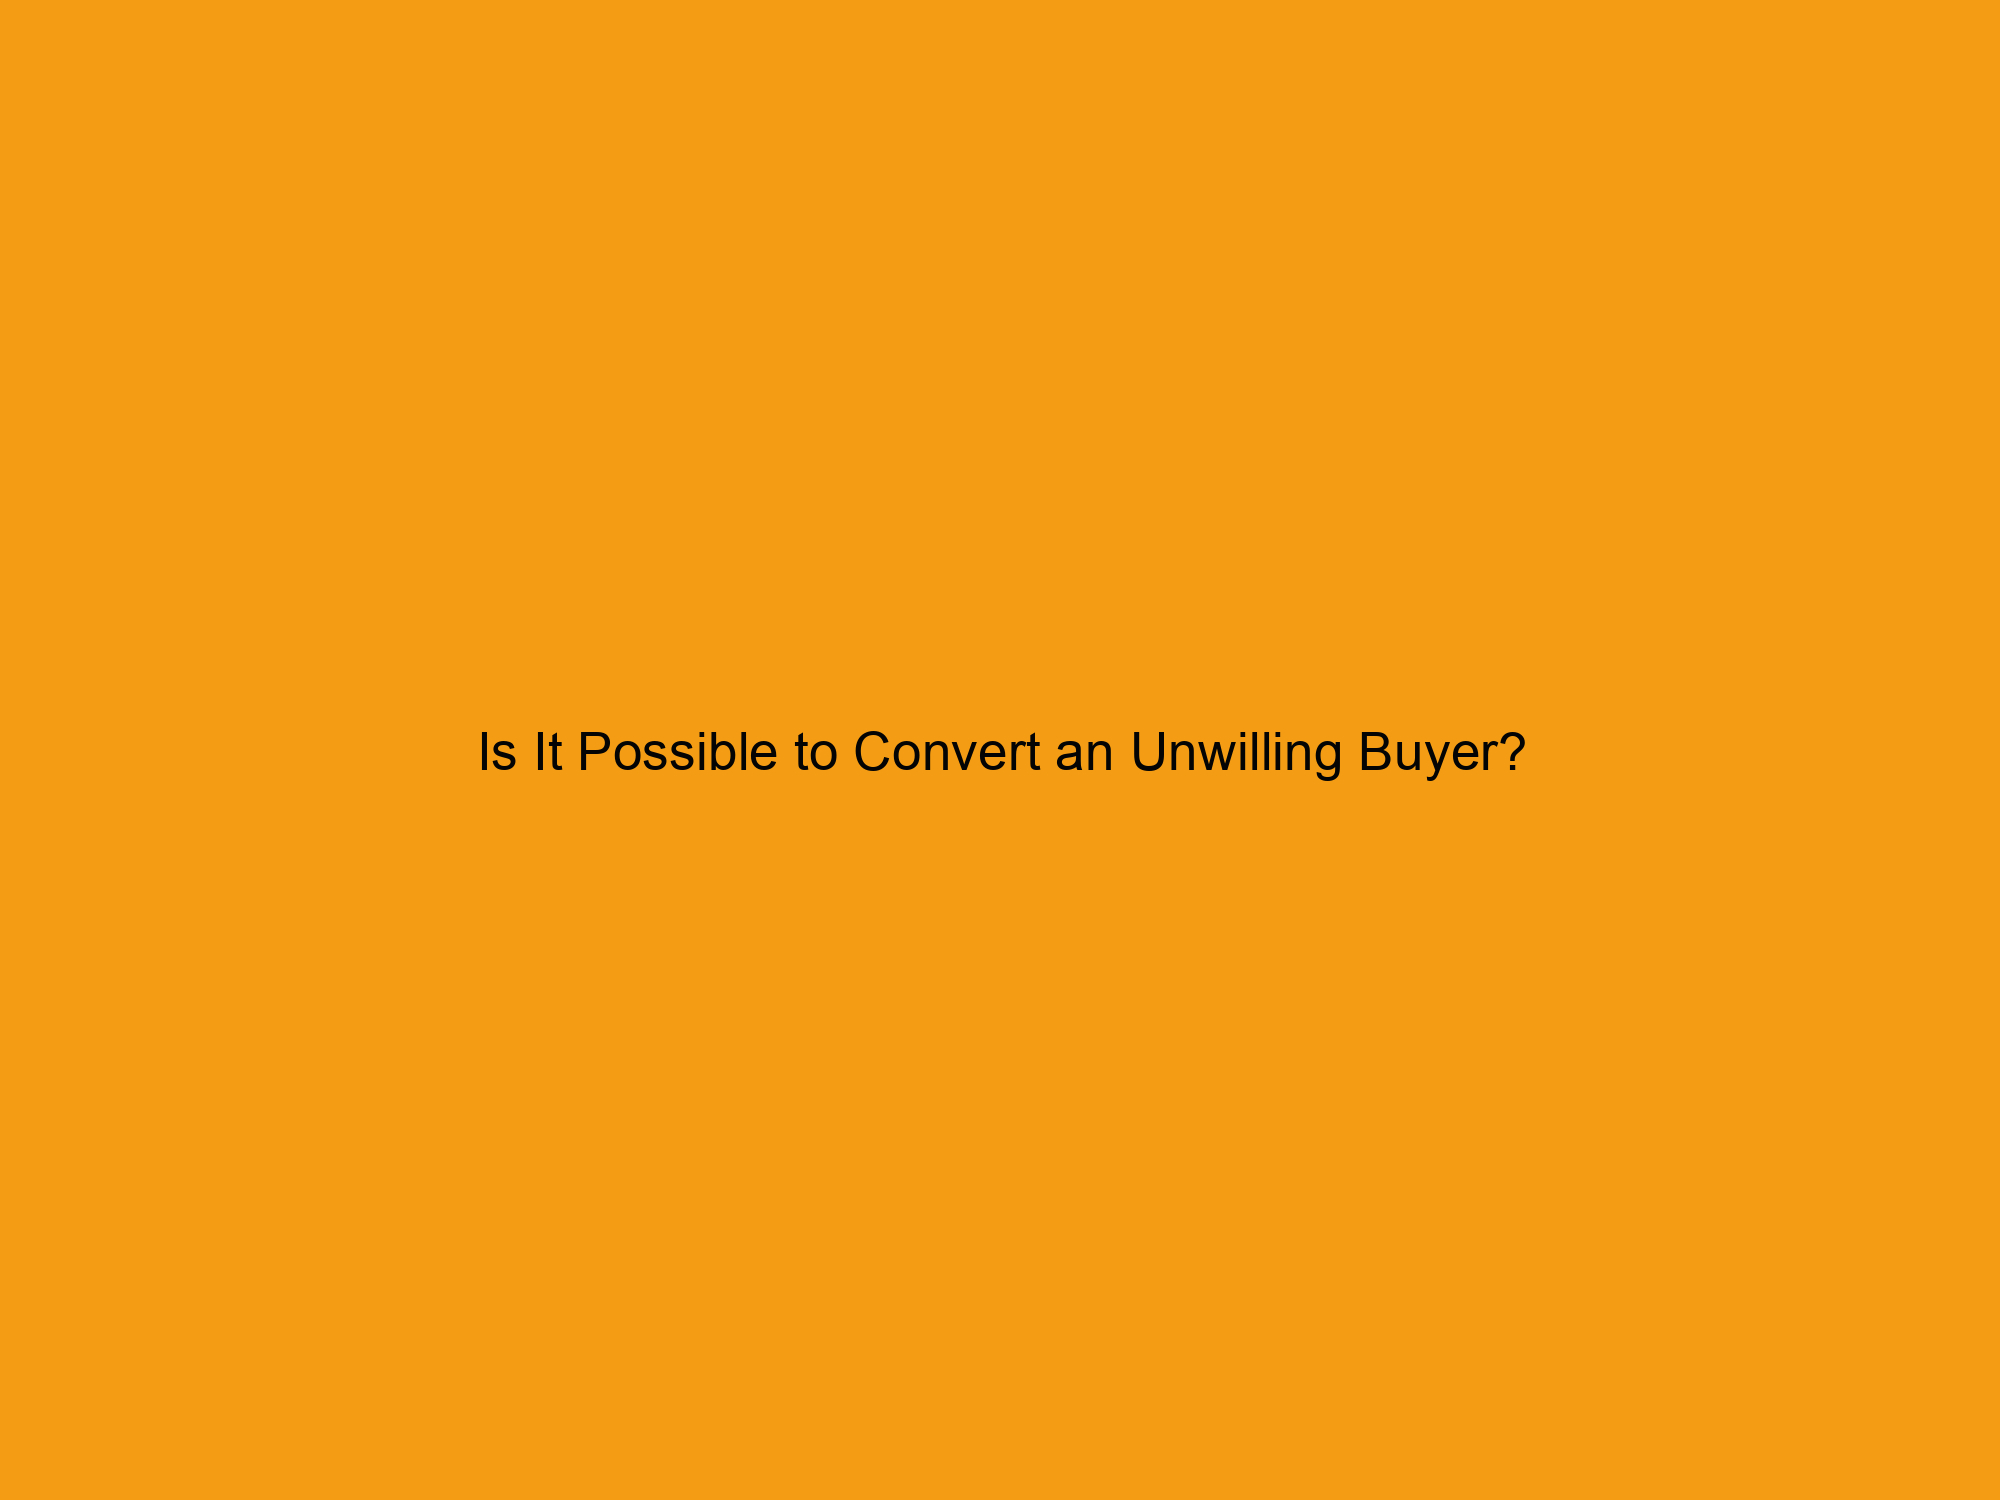 Is It Possible to Convert an Unwilling Buyer?